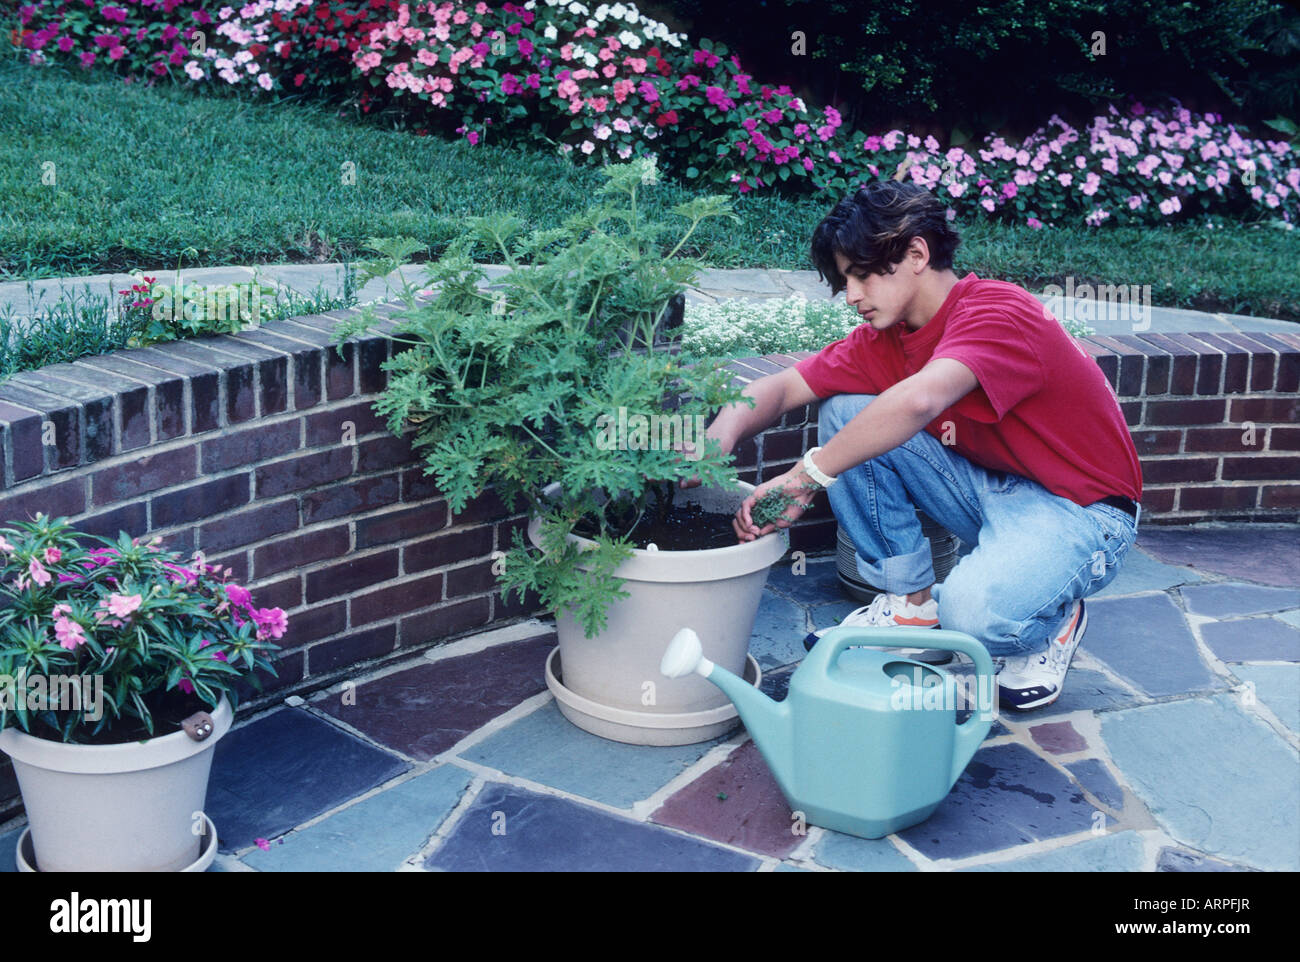 Native American teen watering plants, helpful teen, home life, family, flowers gardening Baltimore, MD Stock Photo